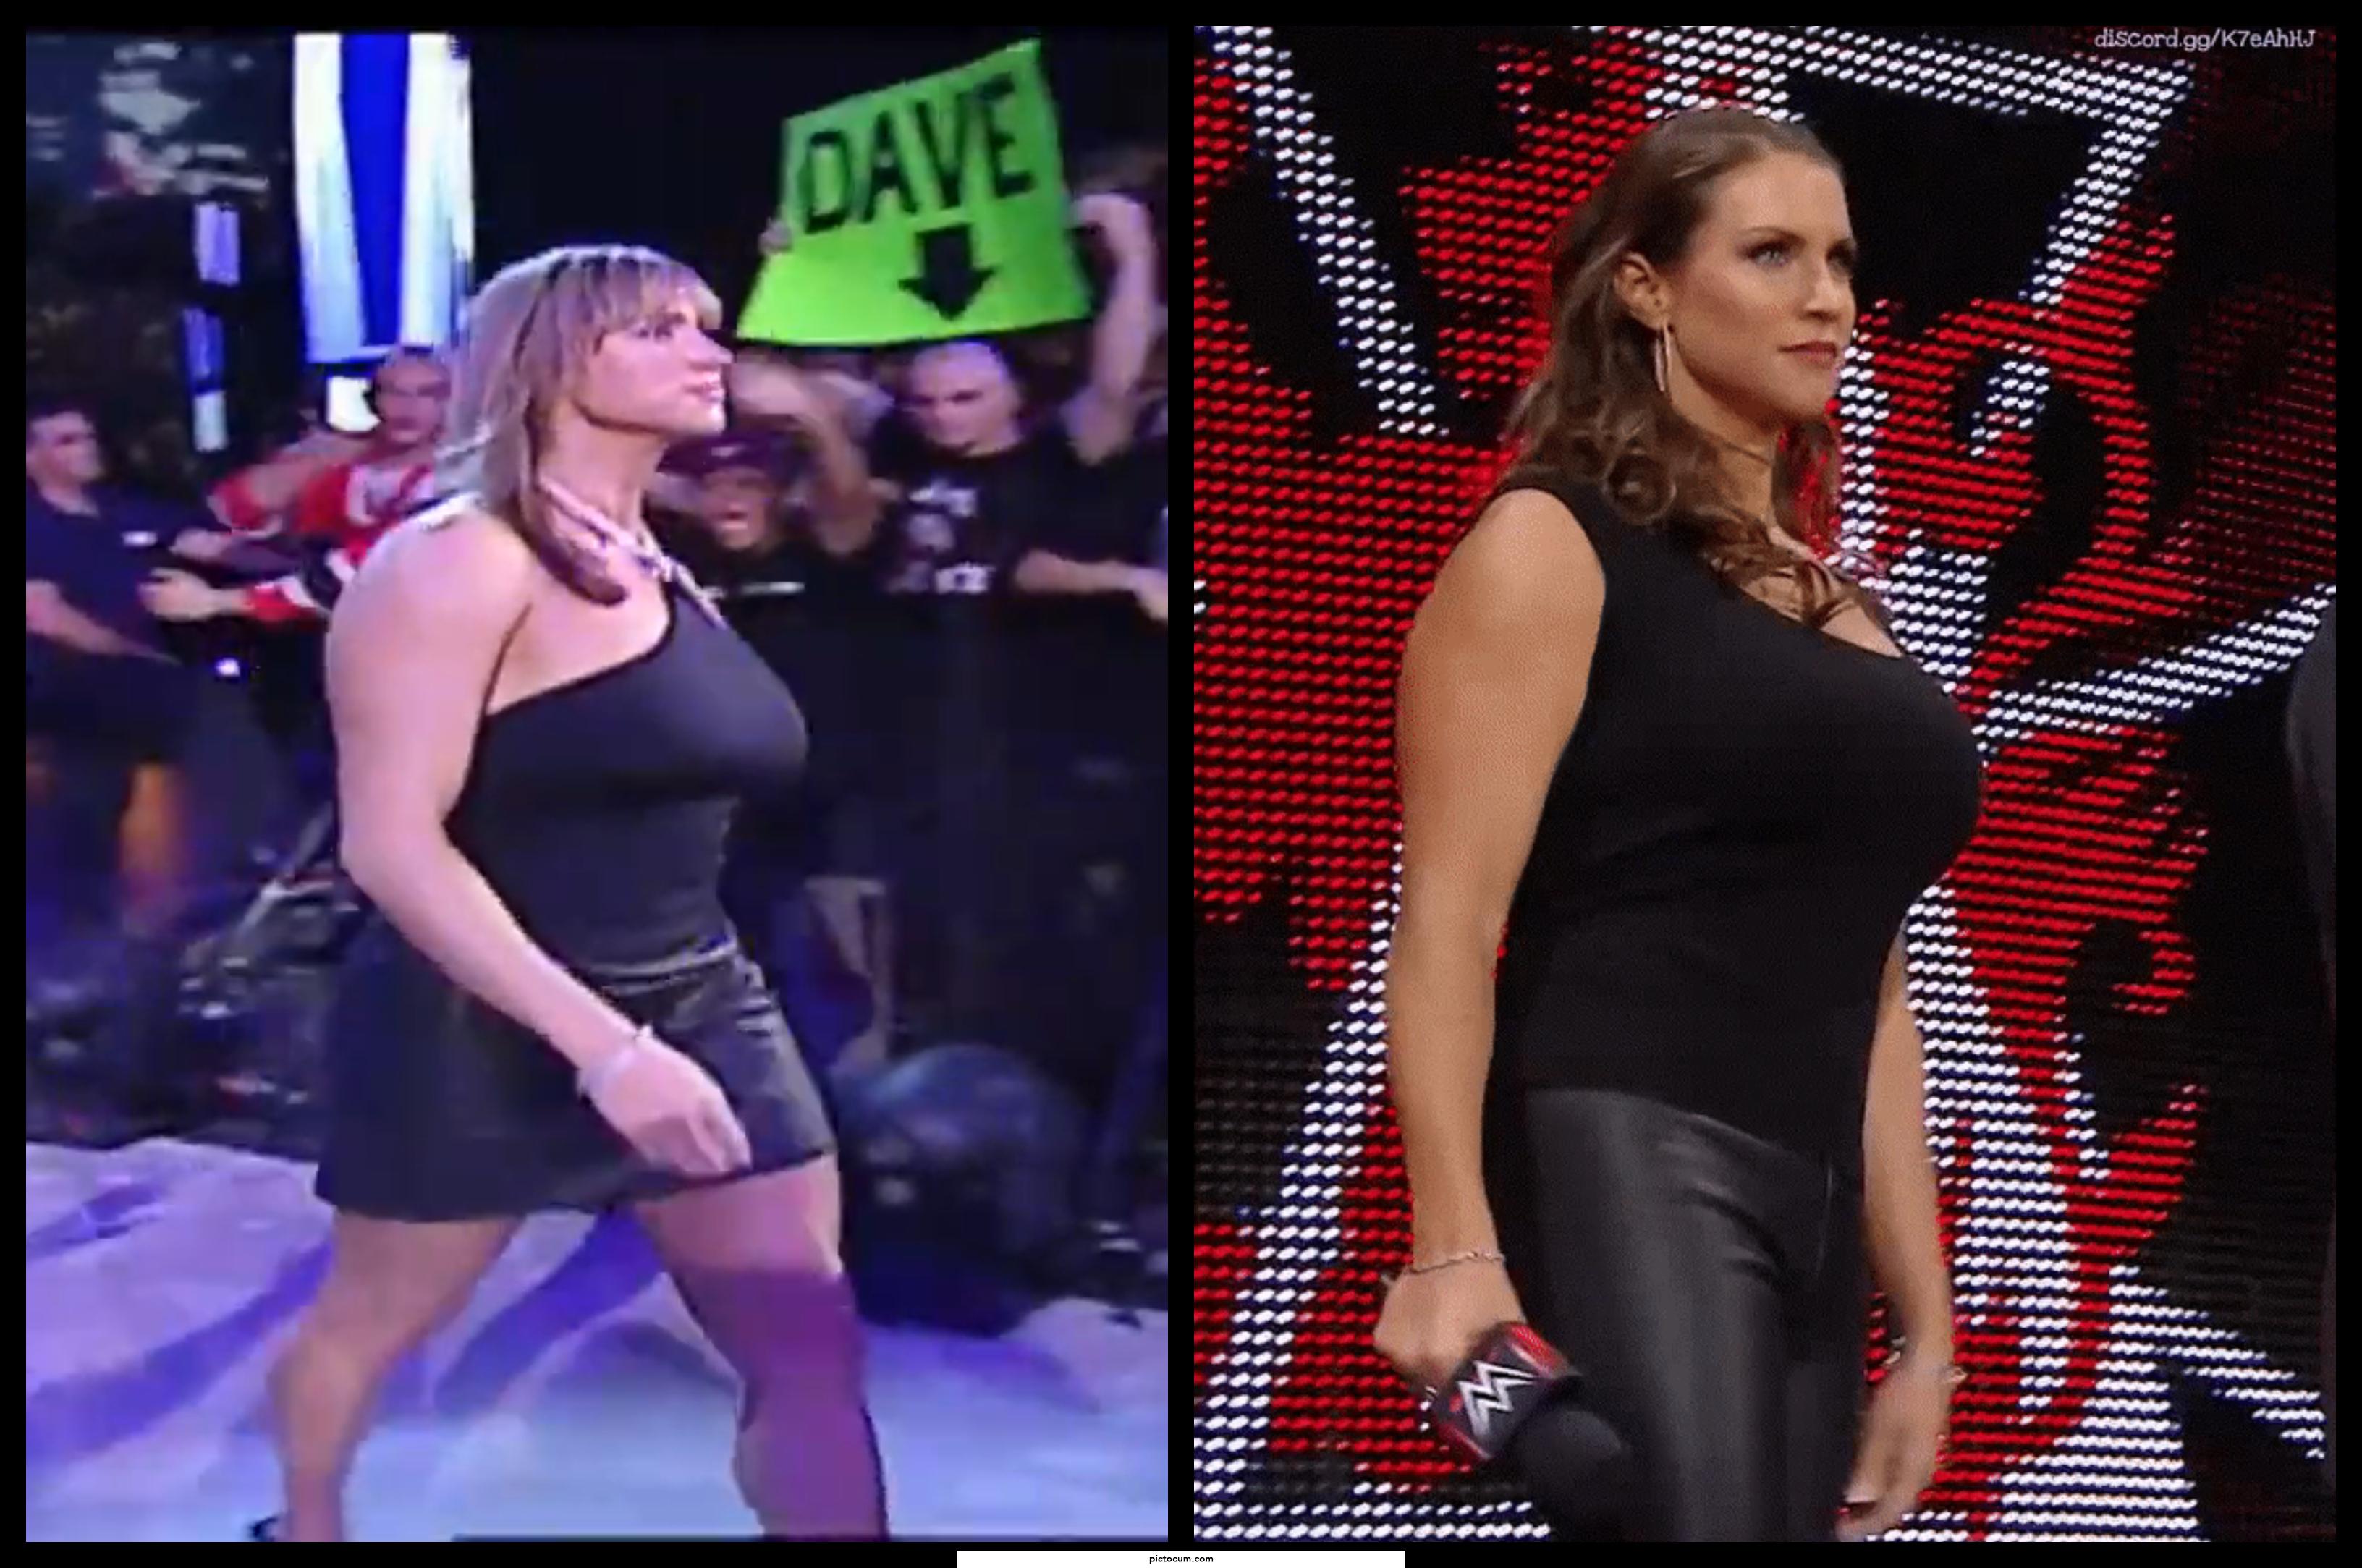 To the WWE buds on here. Young Stephanie McMahon or MILF Stephanie McMahon?